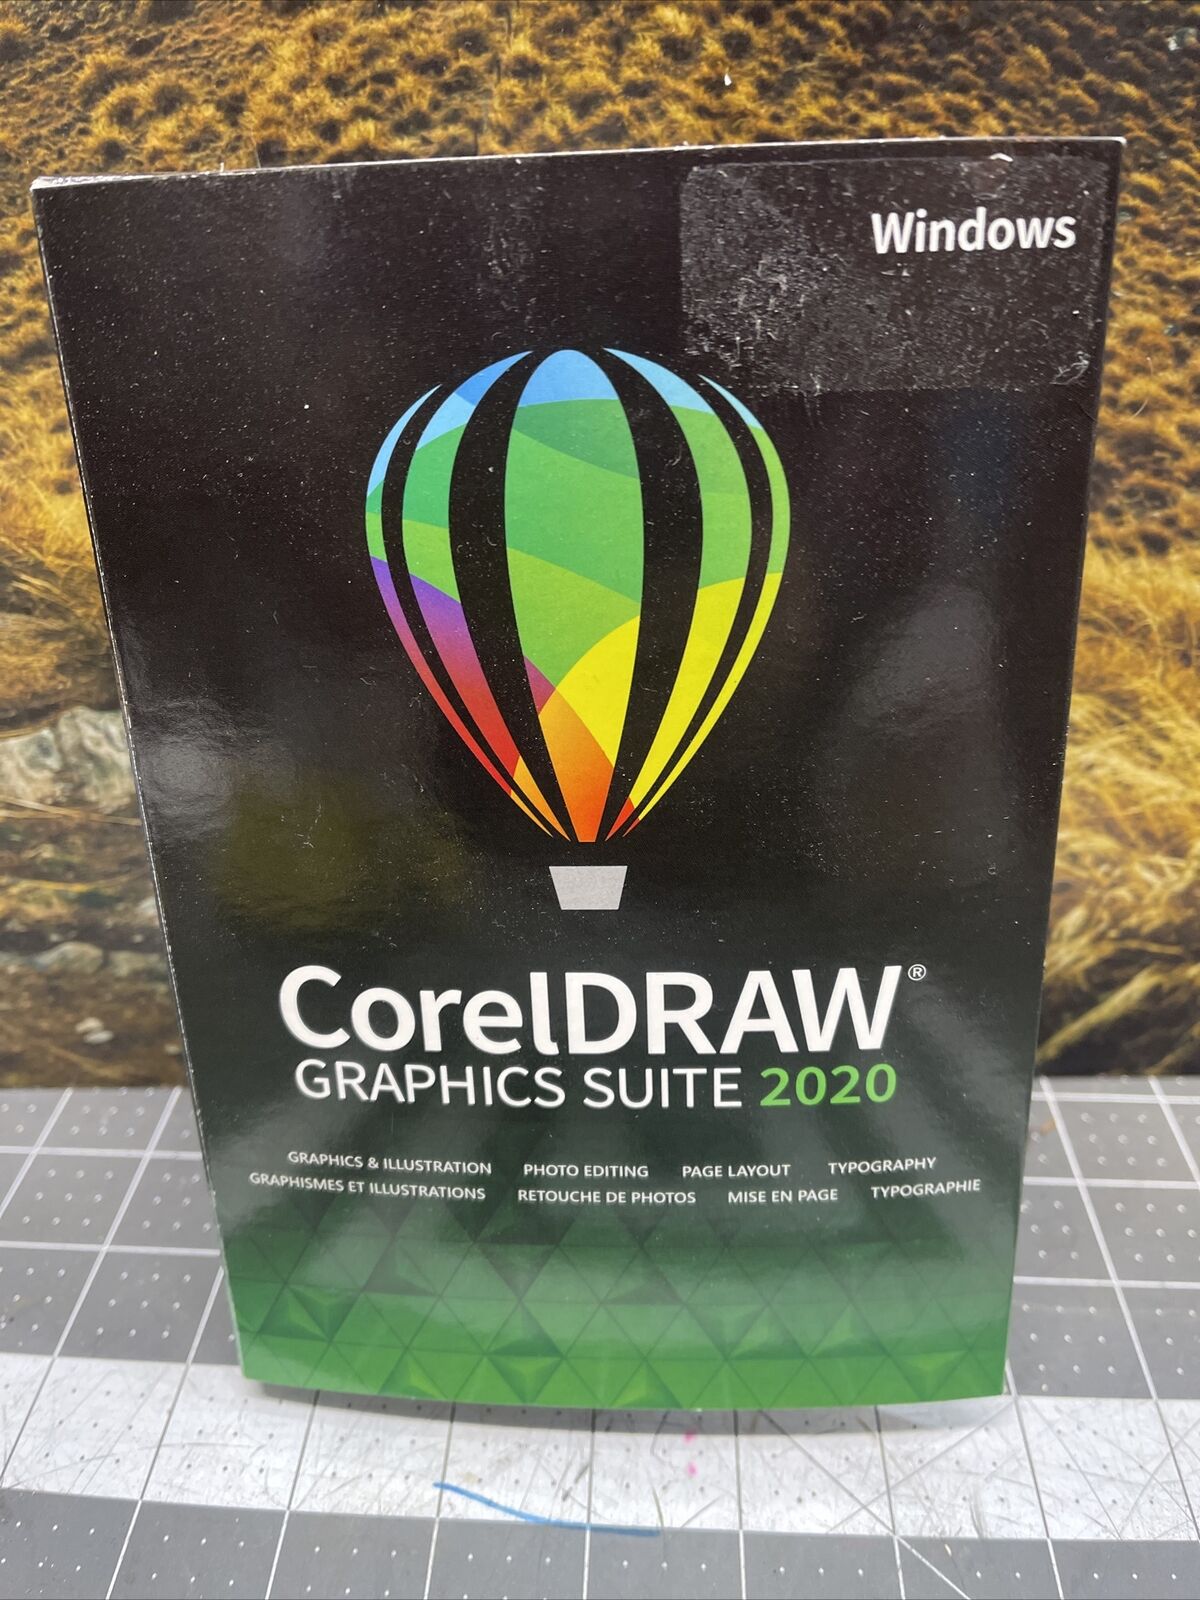 CorelDRAW Graphics Suite 2020 Full Commercial Retail Box Opened No Disc USA PC 